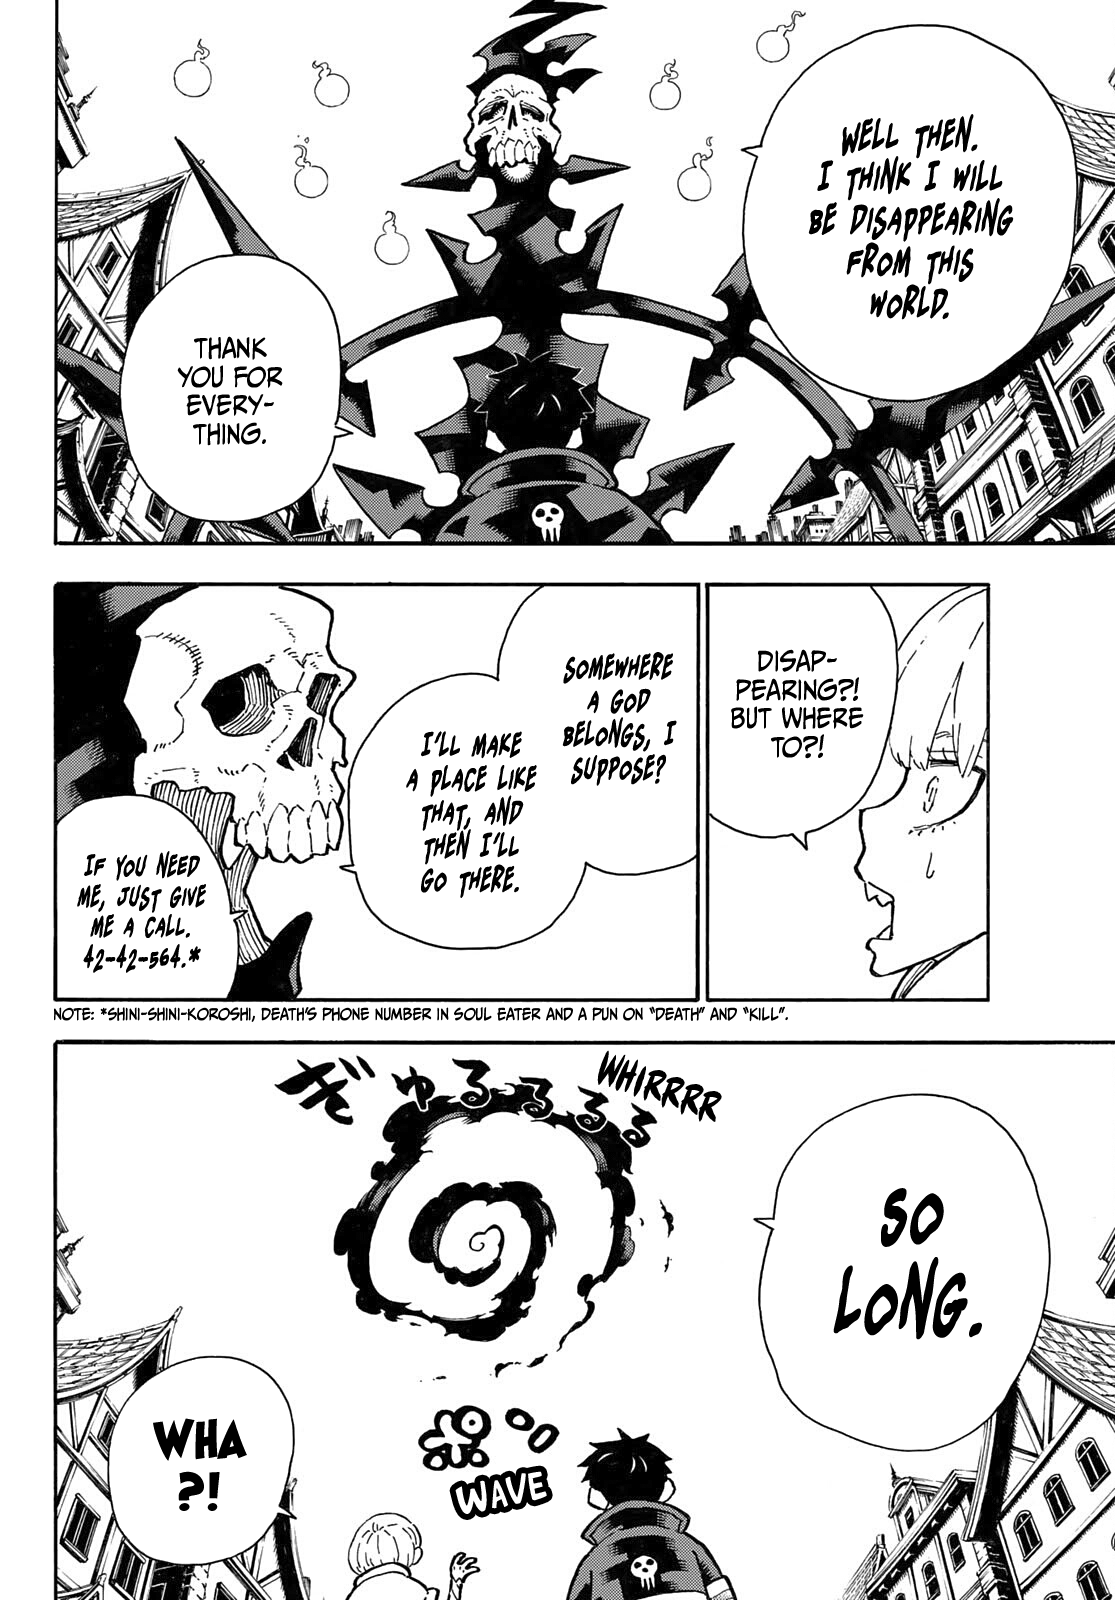 How are Fire Force and Soul Eater Connected? 